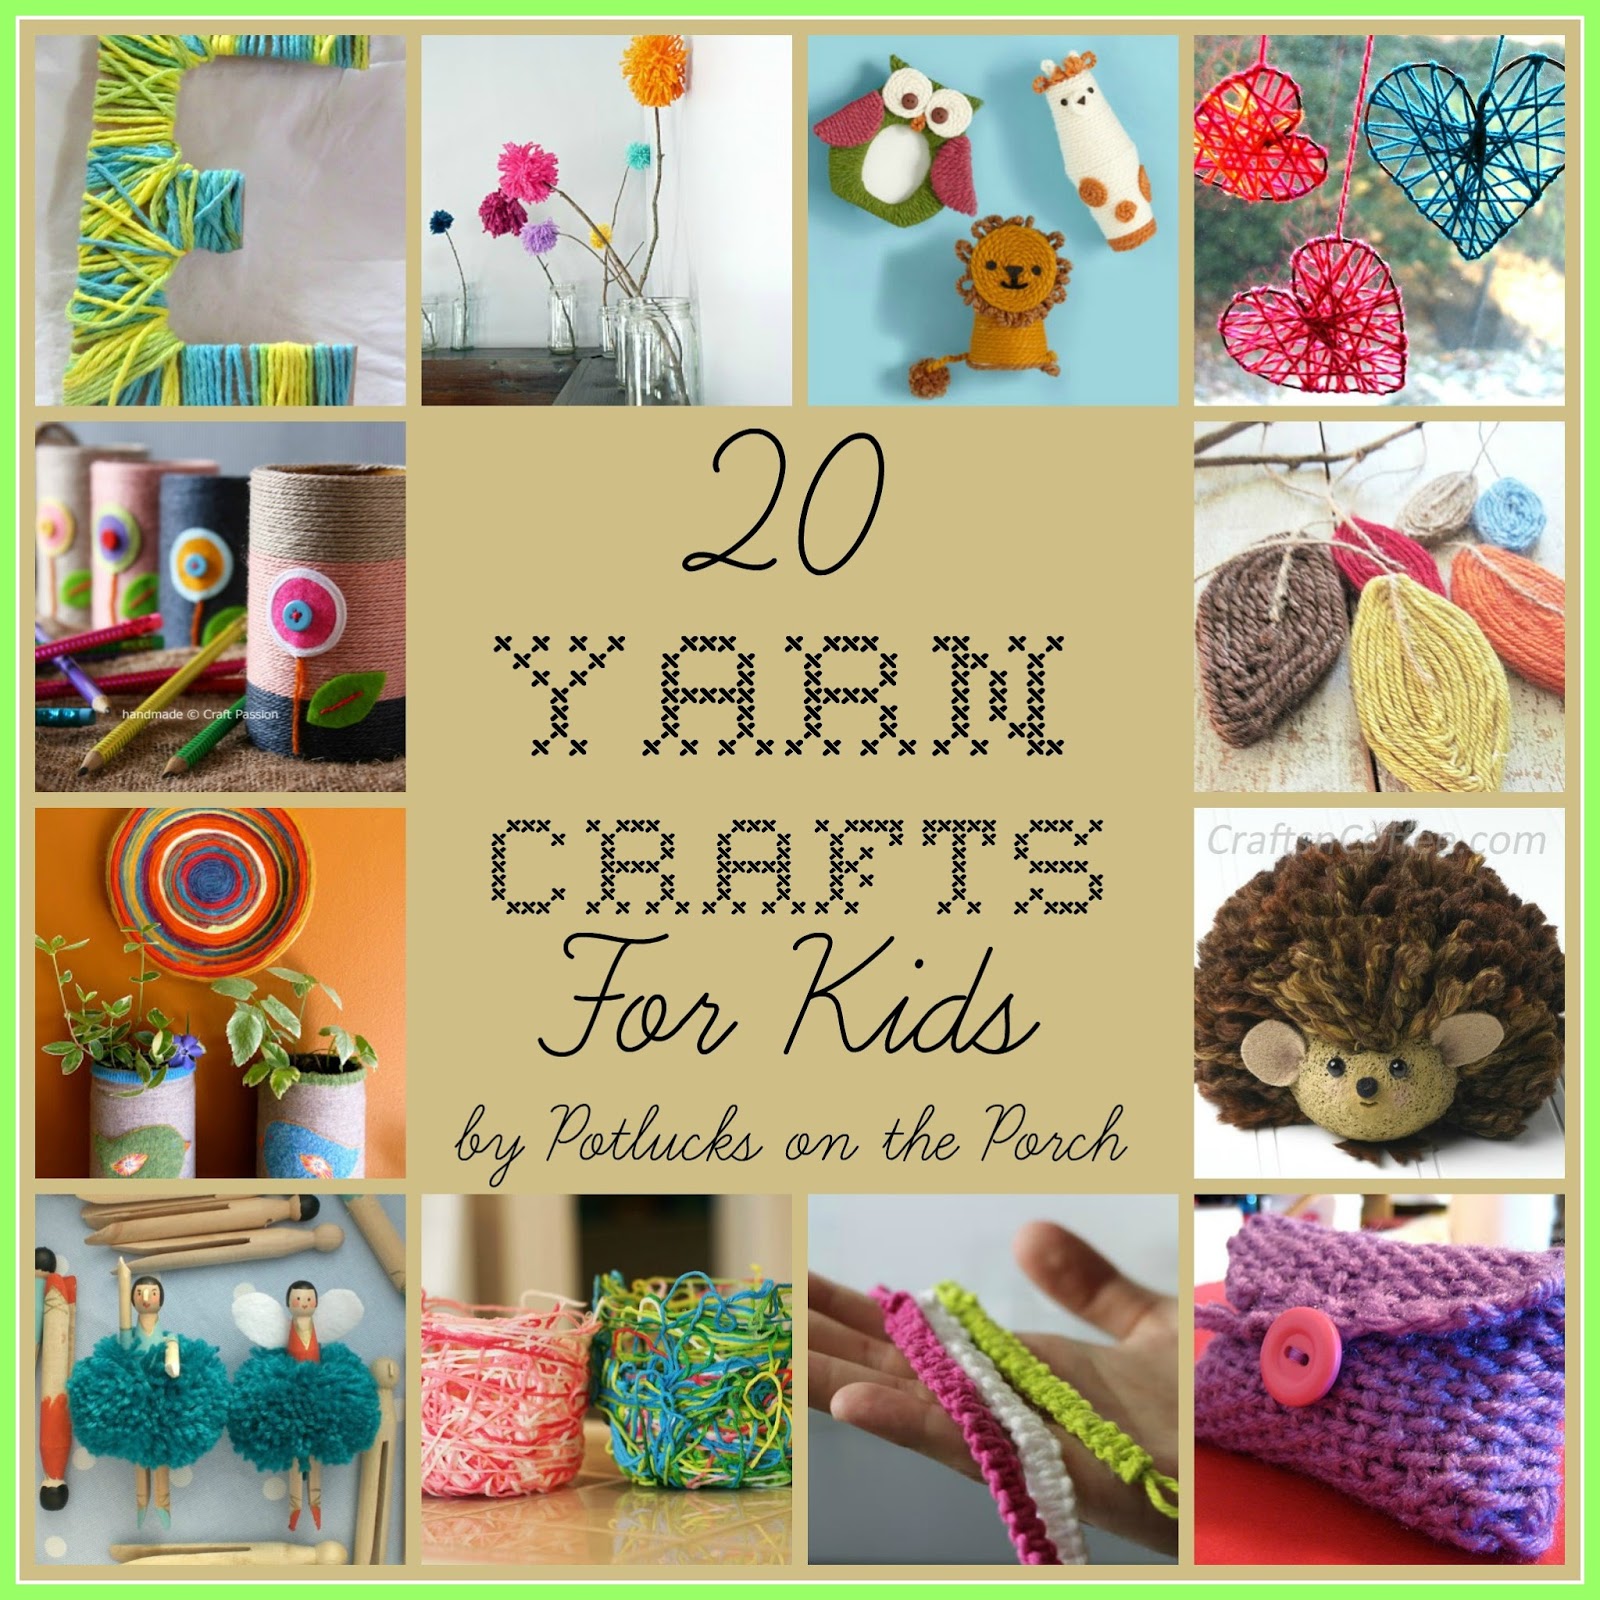 Potlucks on the Porch: 20 Yarn Crafts for Kids